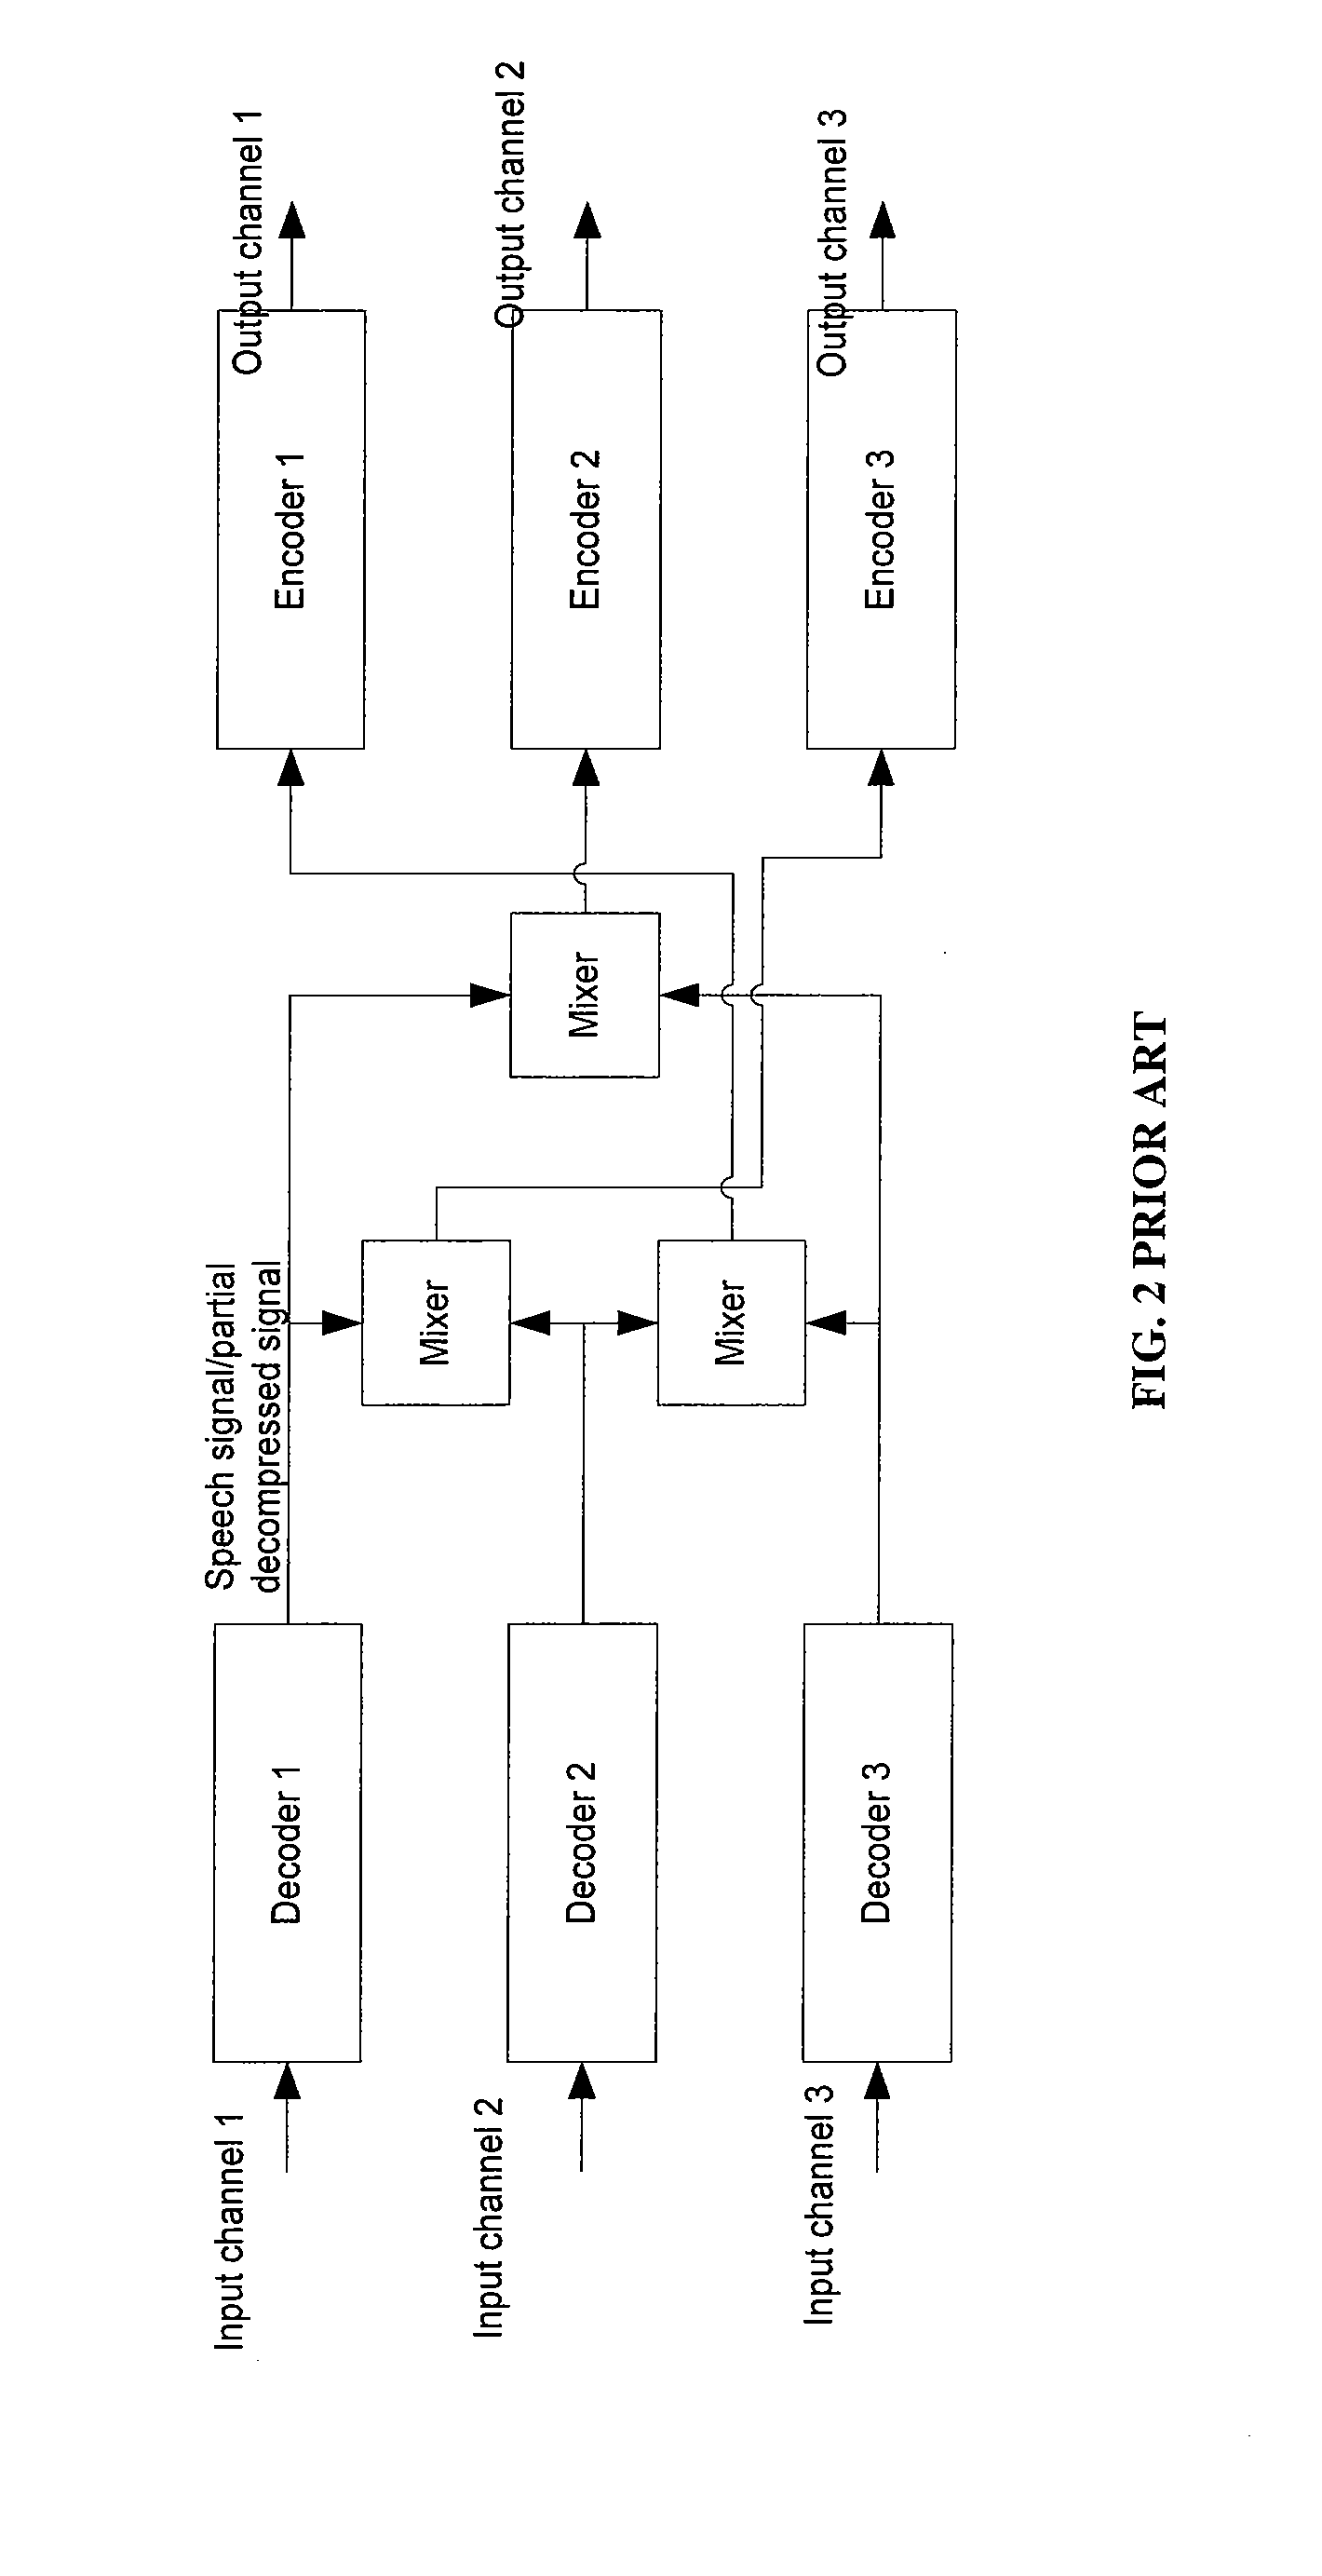 Method and apparatus of voice mixing for conferencing amongst diverse networks